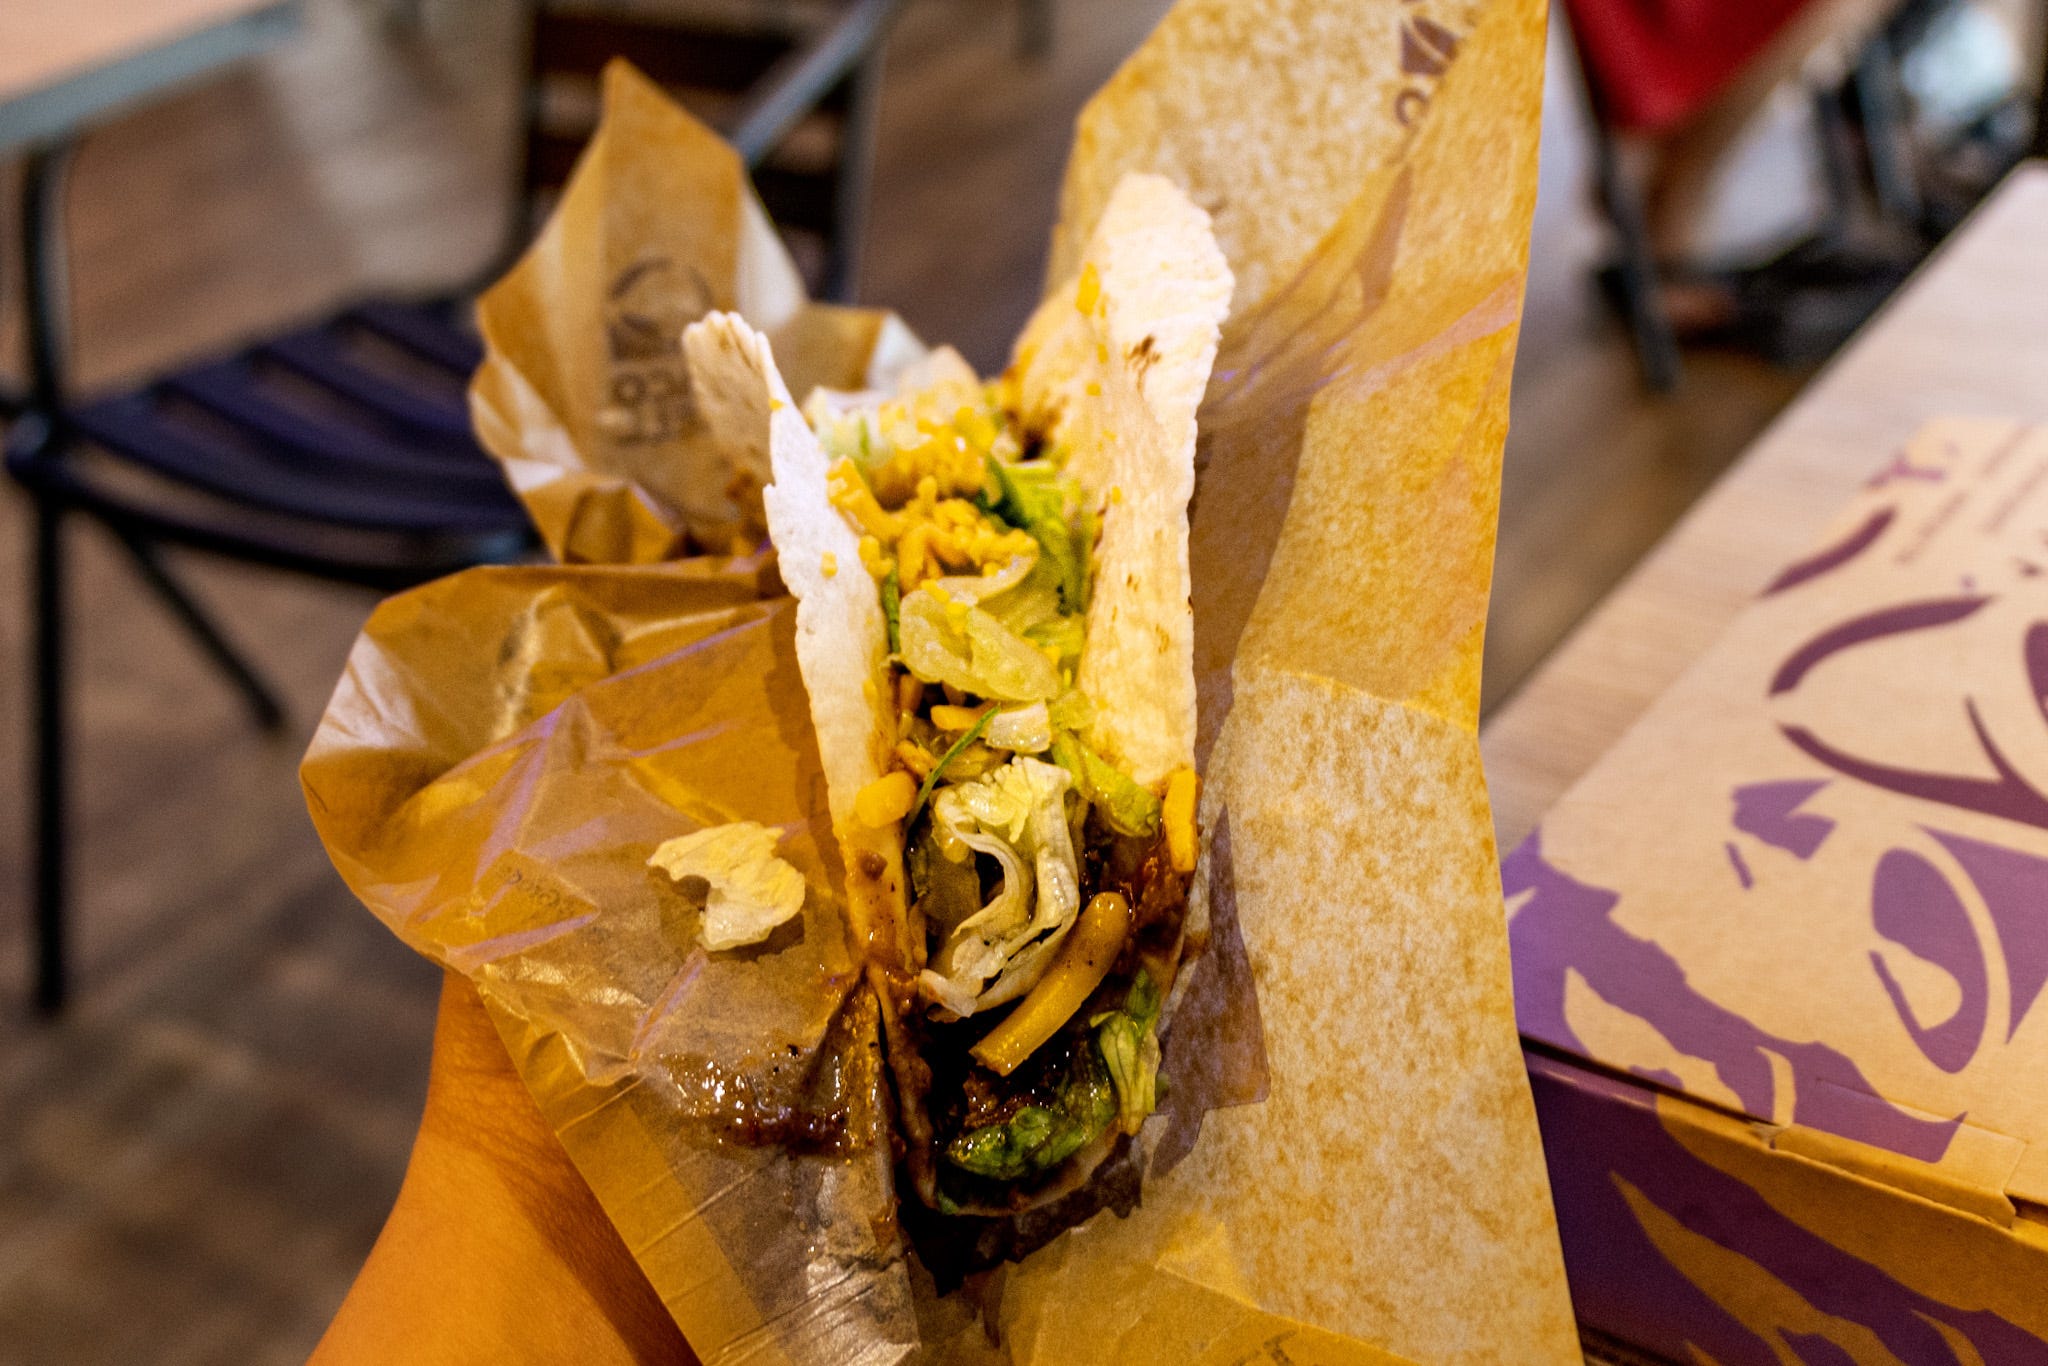 A Taco Bell customer in Colorado who became ill after eating claims he ate a taco laced with rat